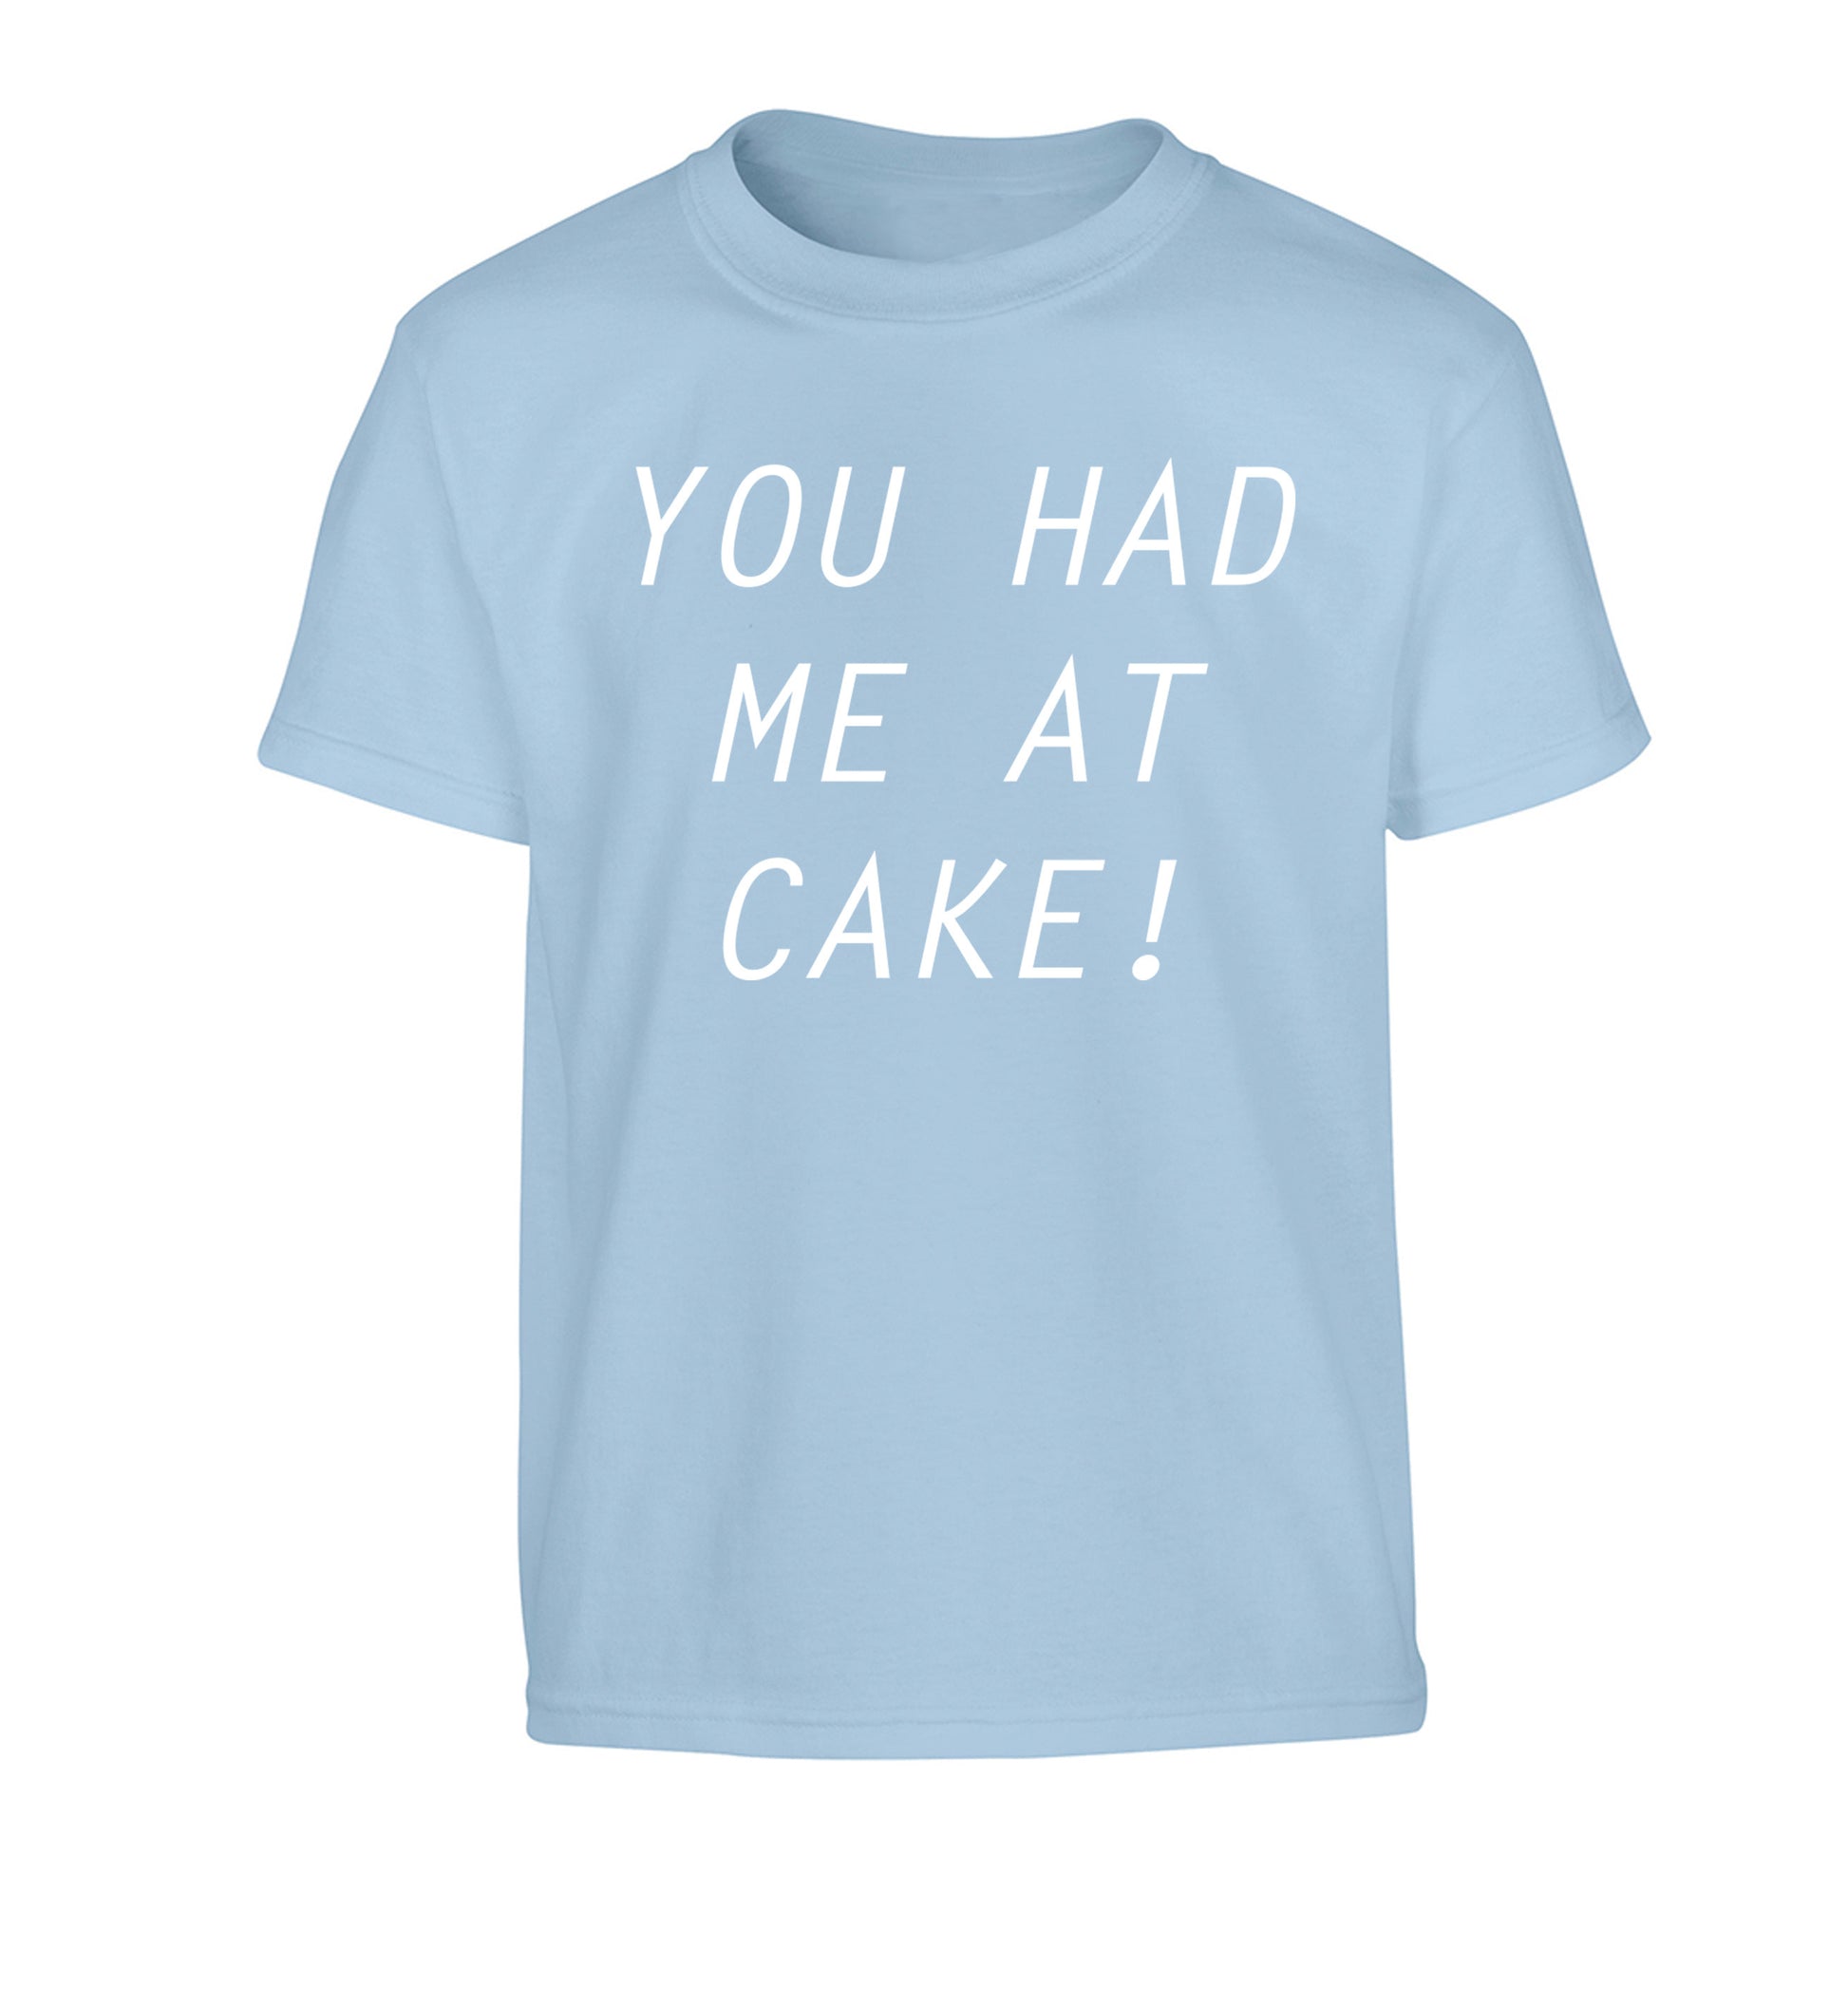 You had me at cake Children's light blue Tshirt 12-14 Years